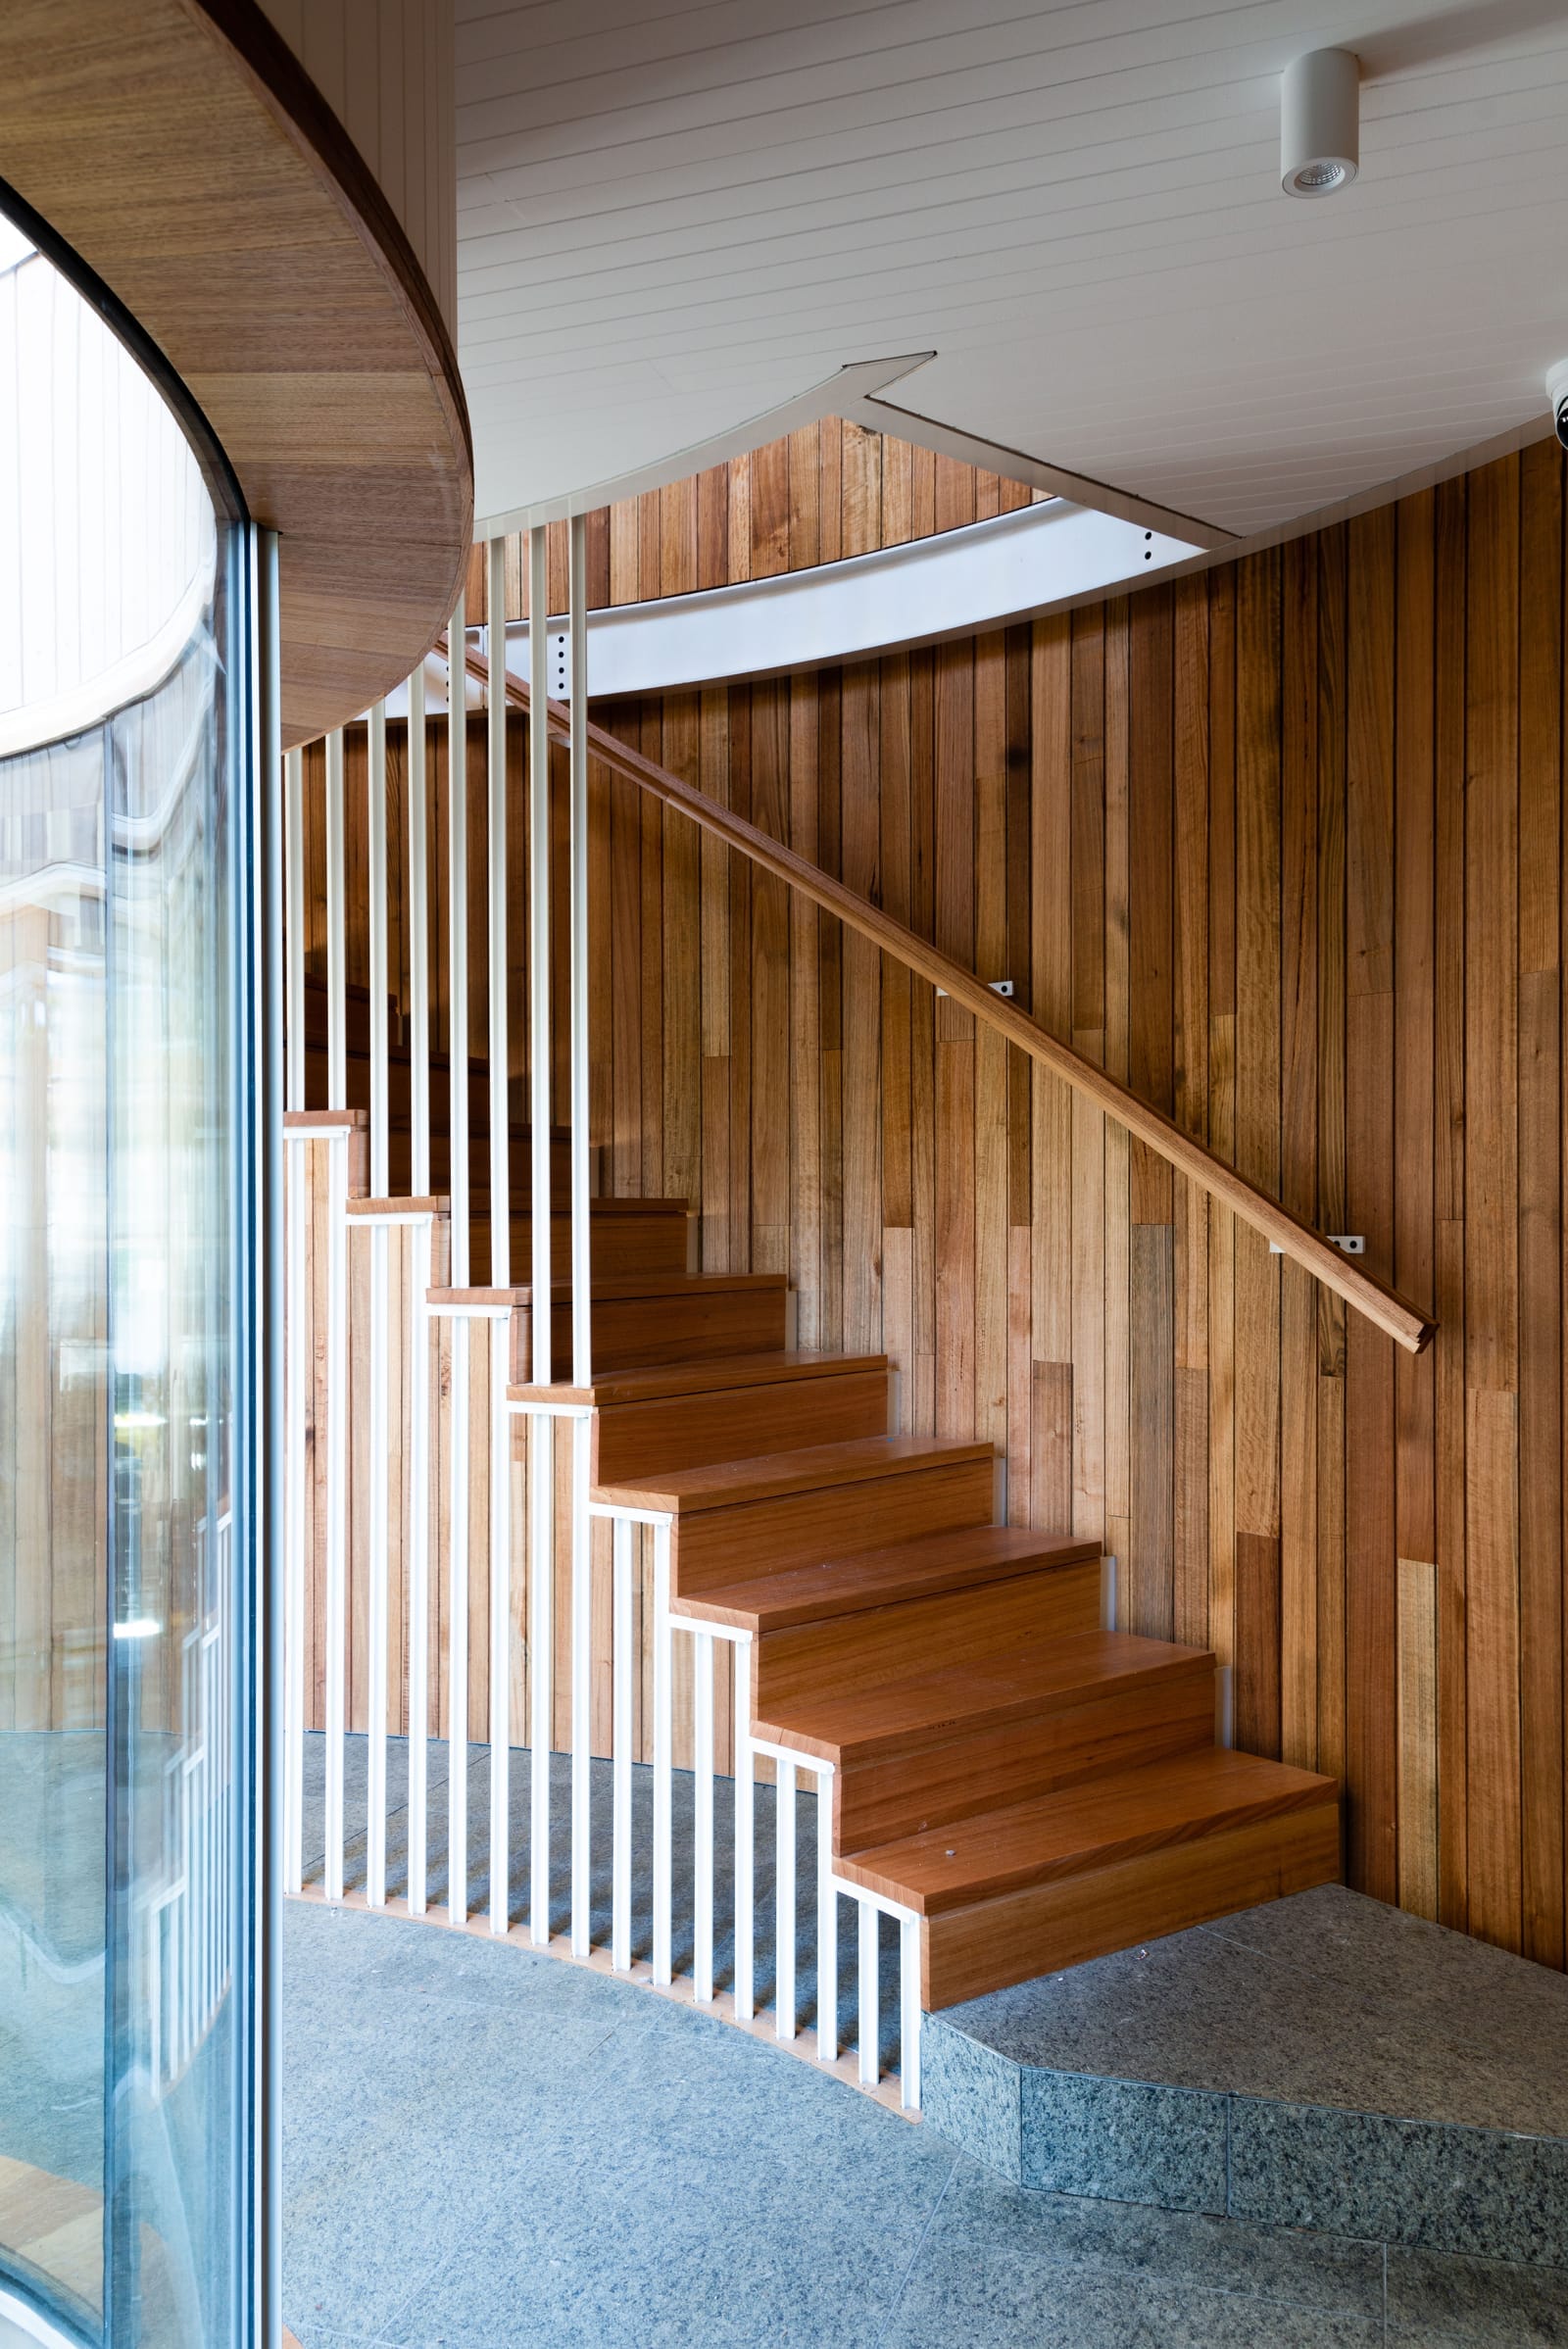 Wattle Bird House by Flett Architecture. Photography by Matt Sansom. Curved timber staircase with timber and metal balustrade. Timber clad walls. Stone tiled floors. 